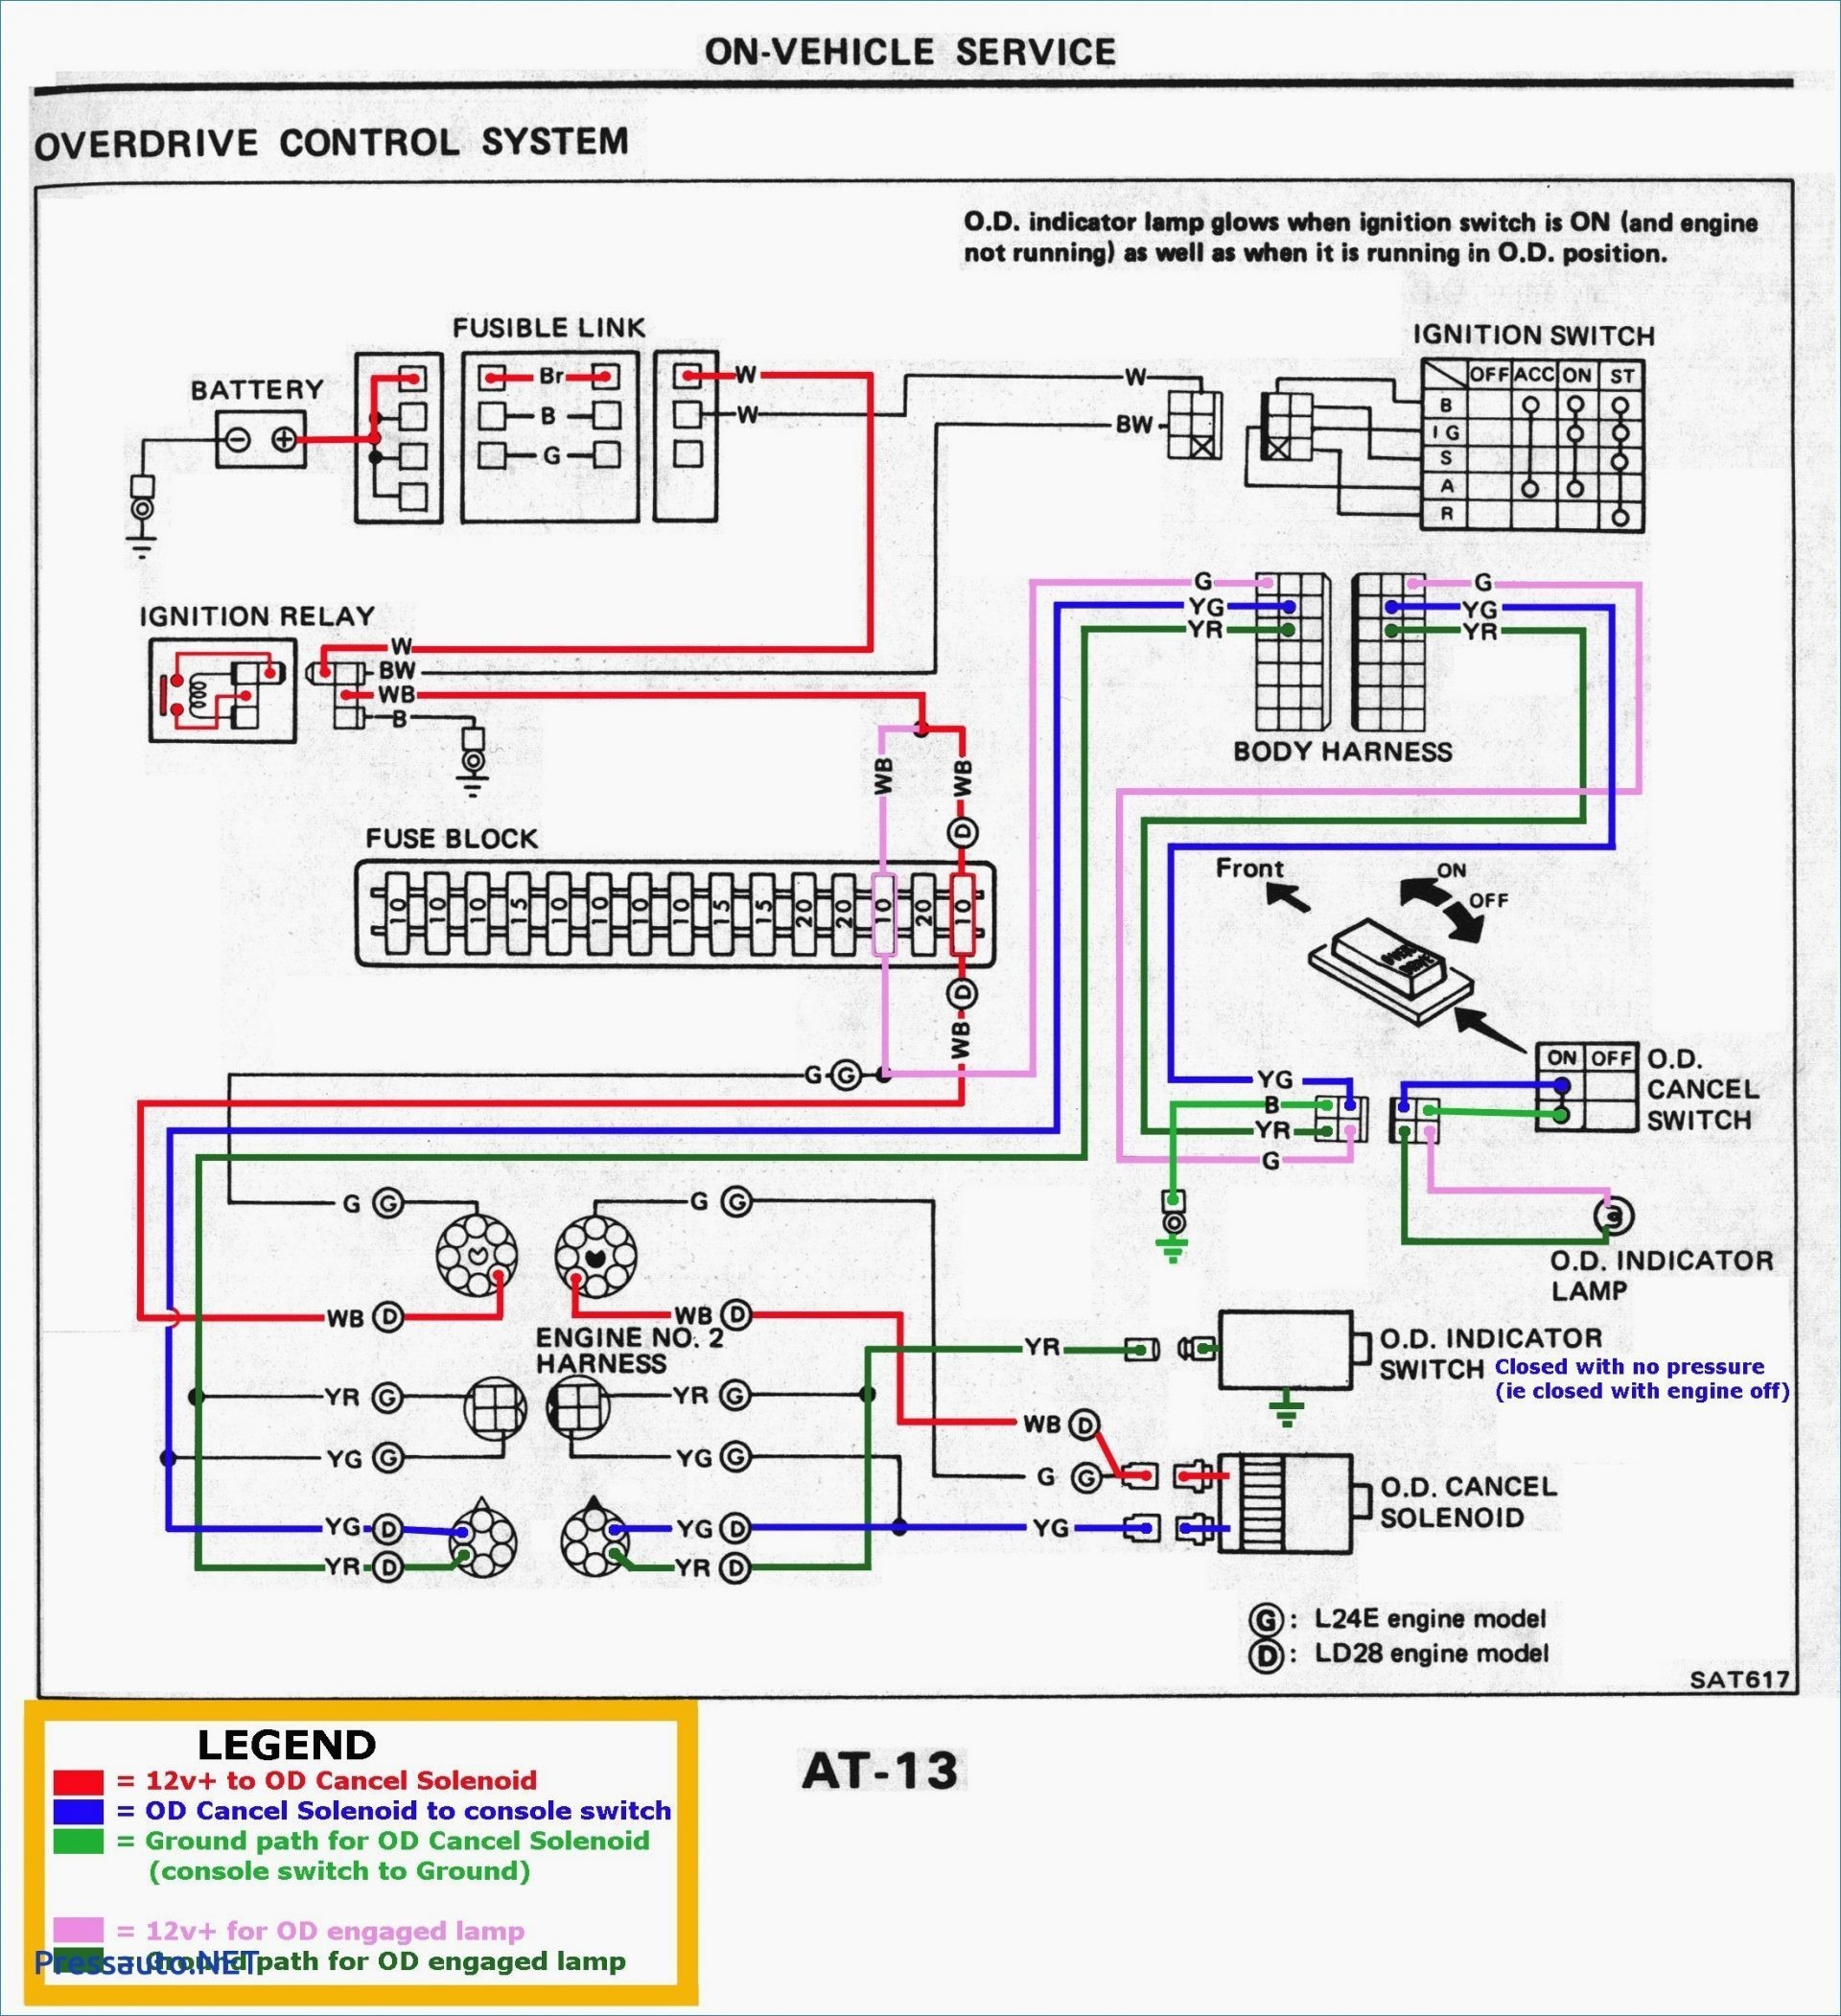 Wiring Diagram for Kitchen Lights Reference Wiring Diagram for Lights In House New House Electrical Wiring